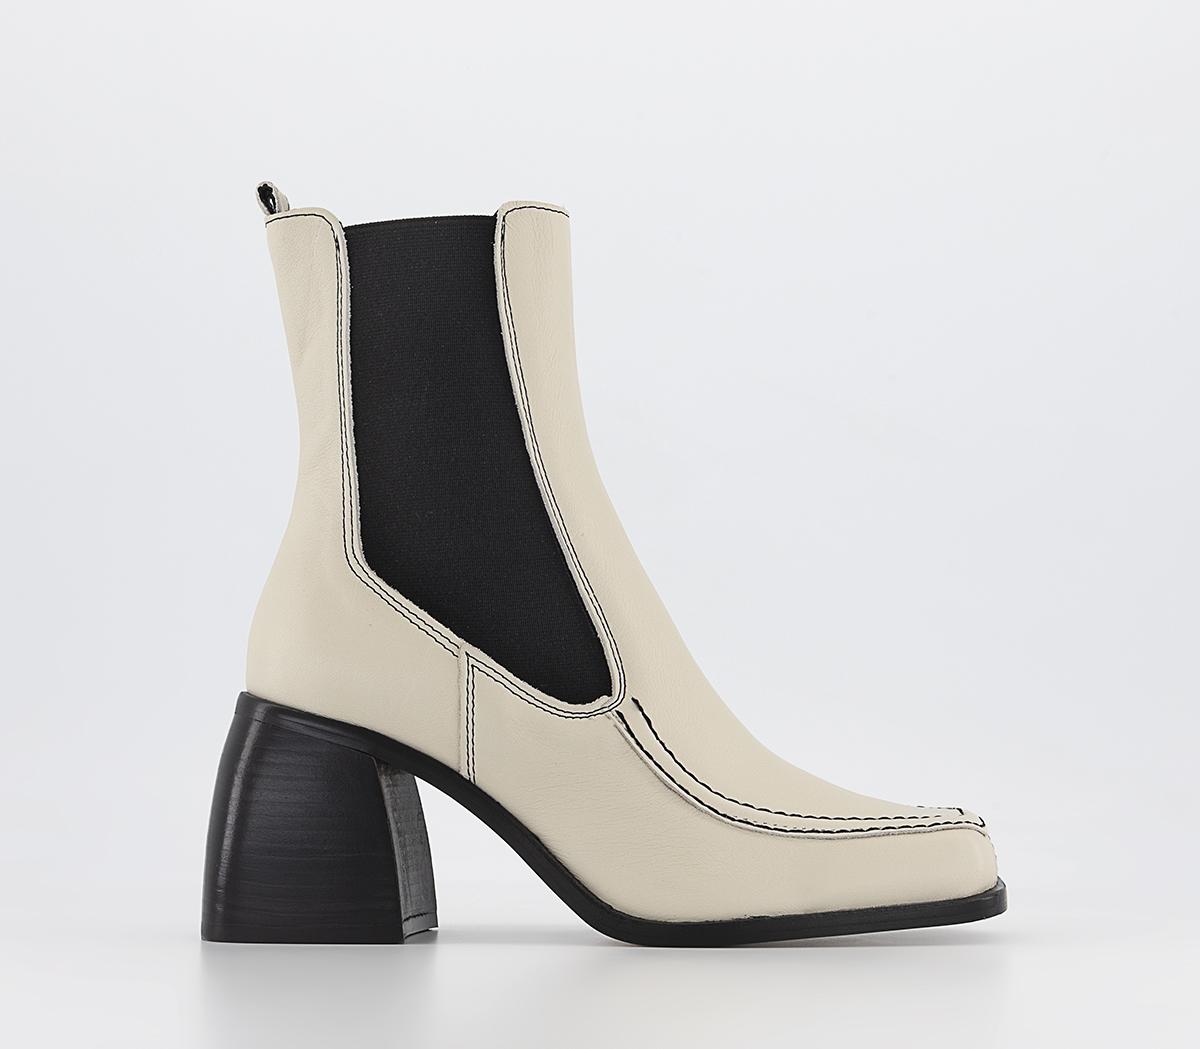 OFFICEAxel Square Toe Apron Block Heel Ankle BootsWhite Leather